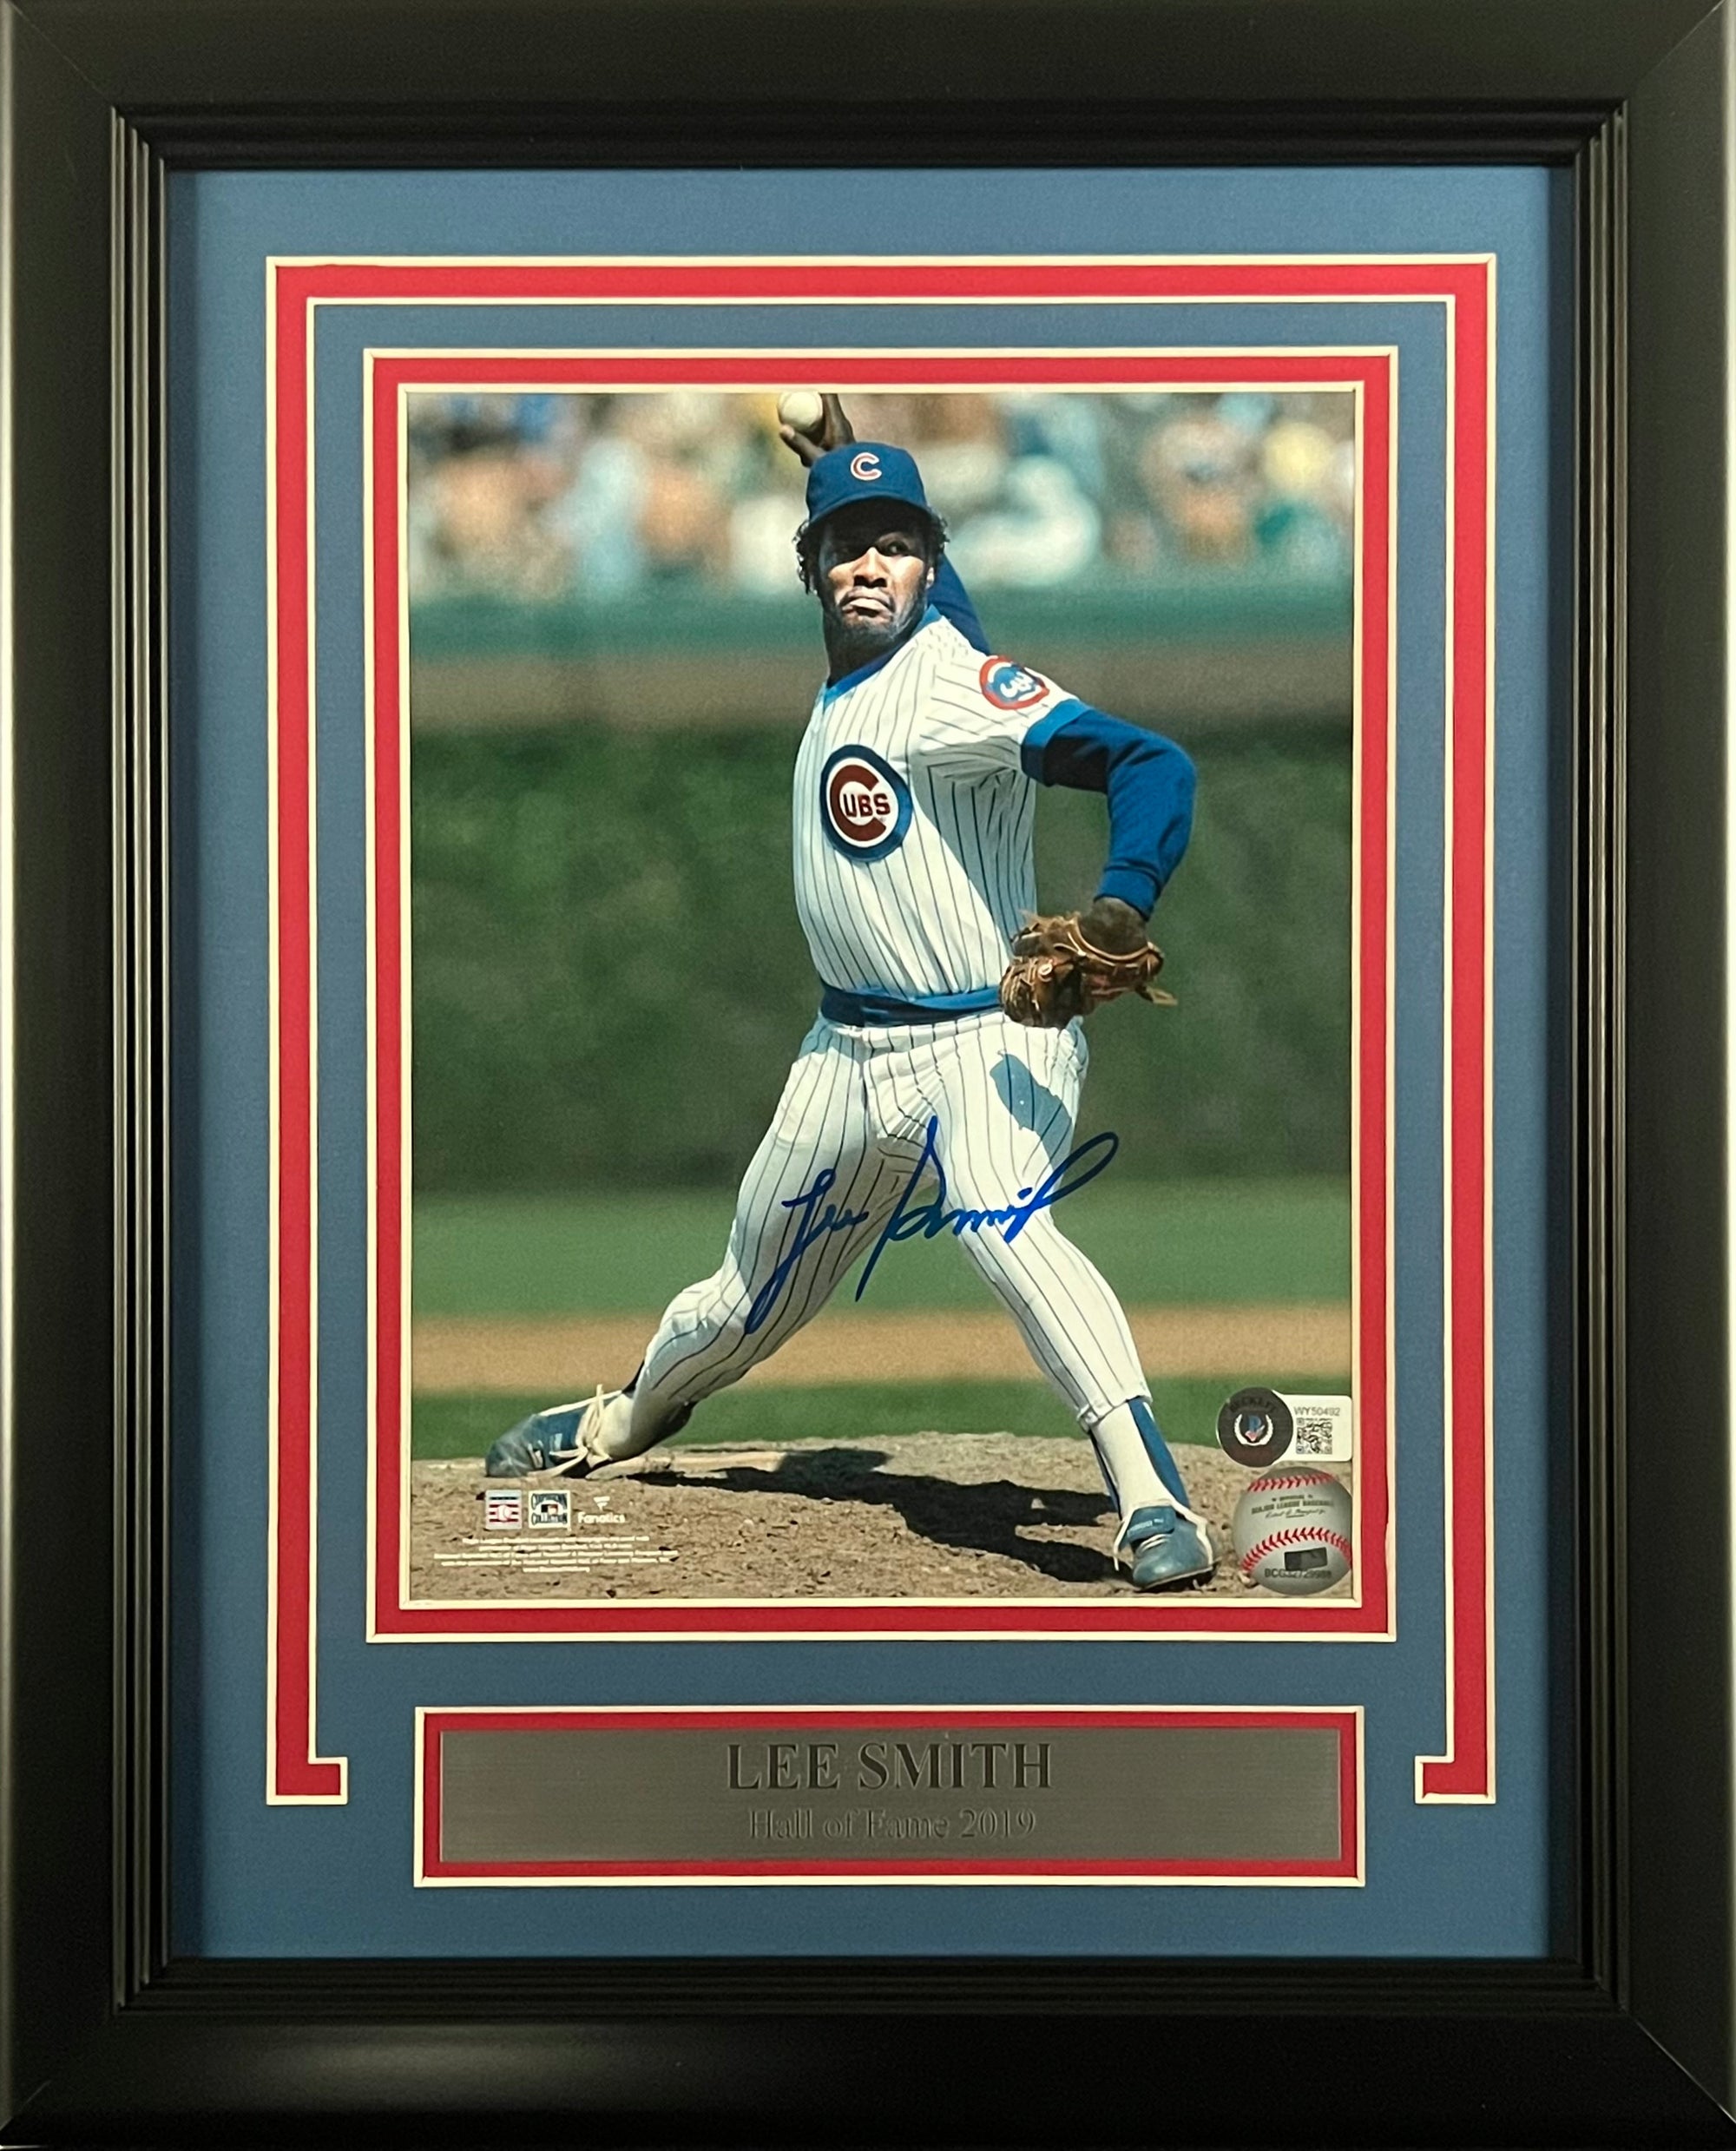 Lee Smith Chicago Cubs Autographed 8x10 Photo Framed